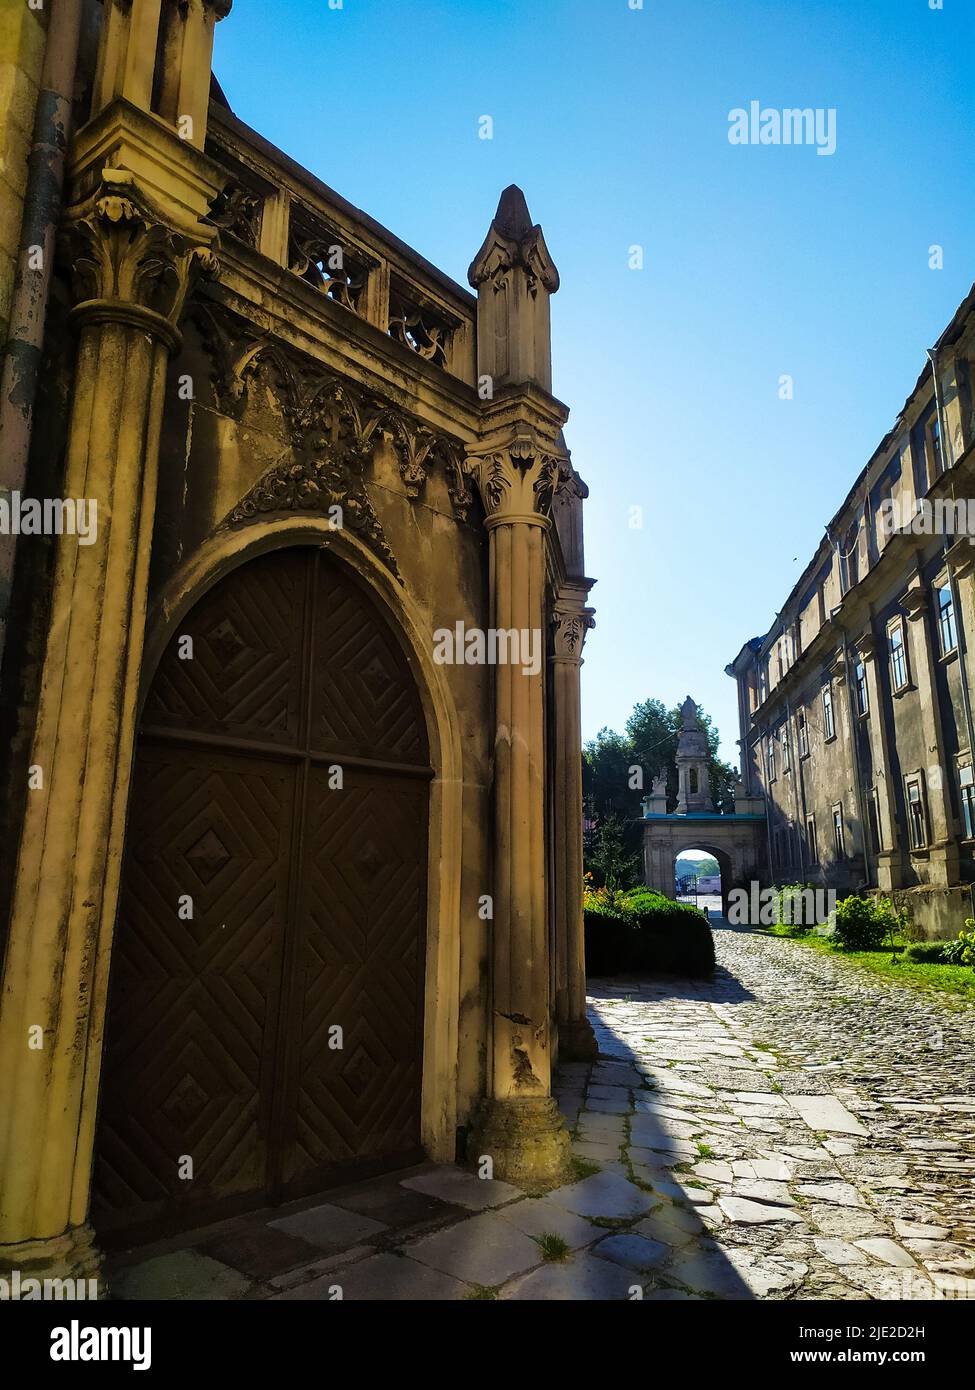 two-leaf wooden door under a semicircular arch of stone Stock Photo